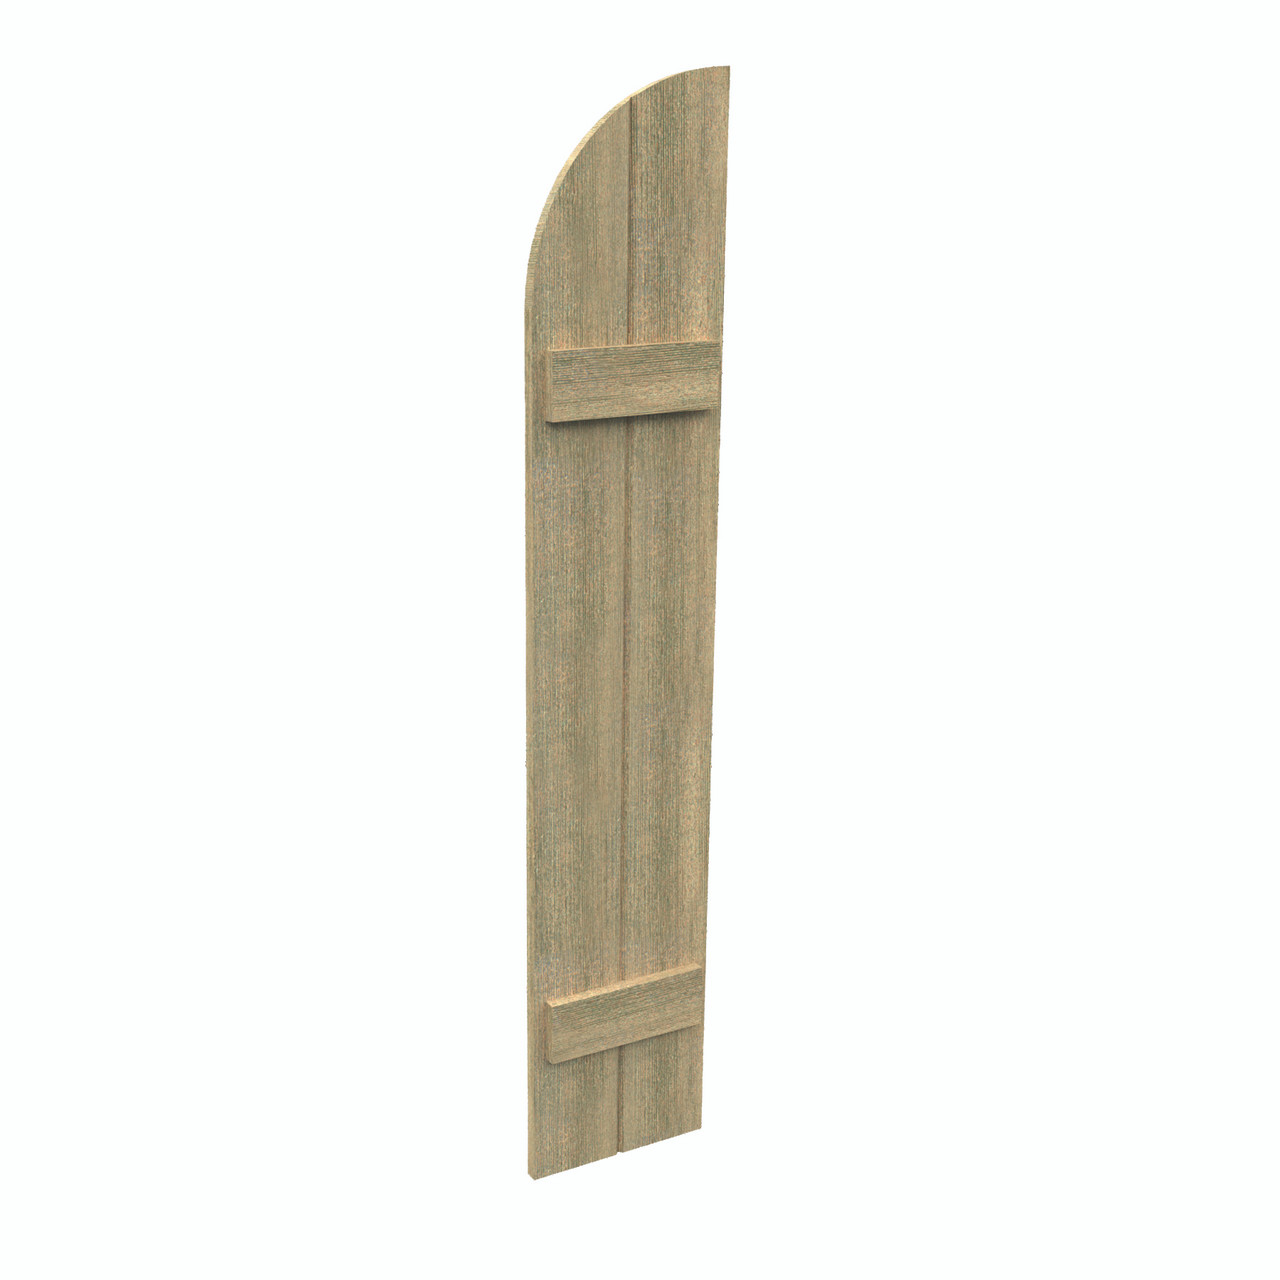 12 inch by 50 inch Quarter Round Shutter with 2-Boards